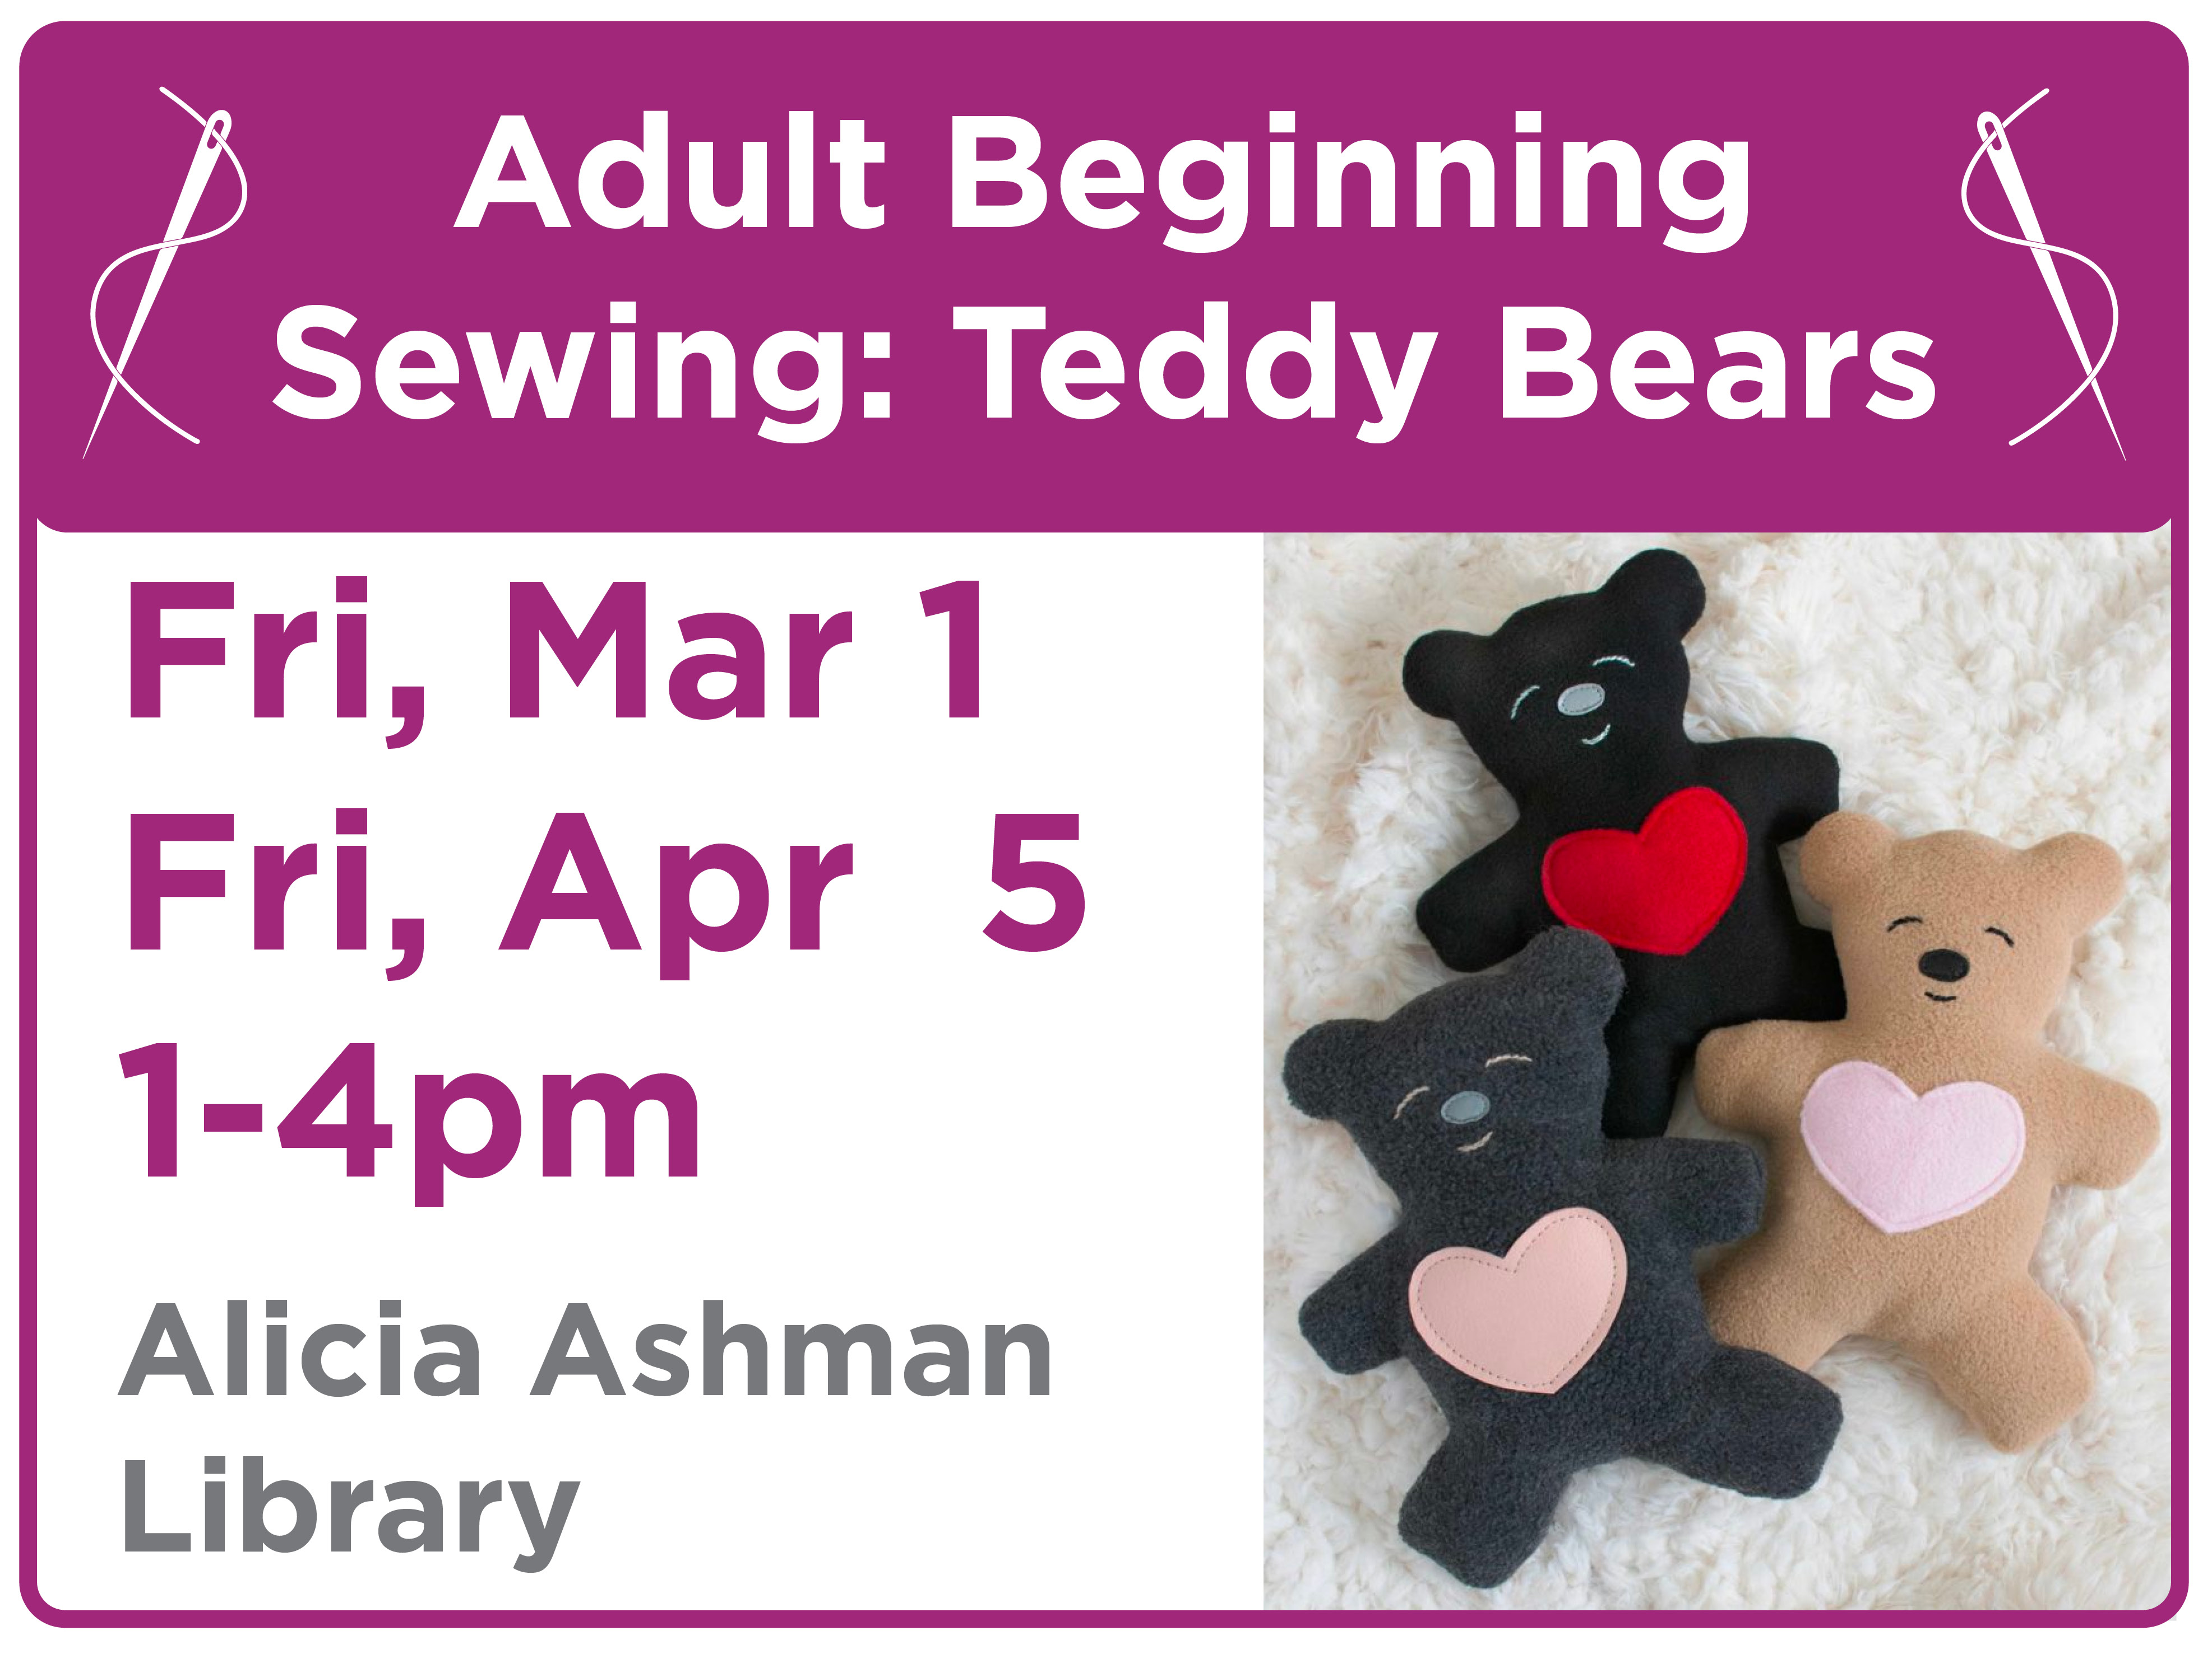 Adult Beginning Sewing Teddy Bears with Rita Salm at Alicia Ashman Library Spring 2024